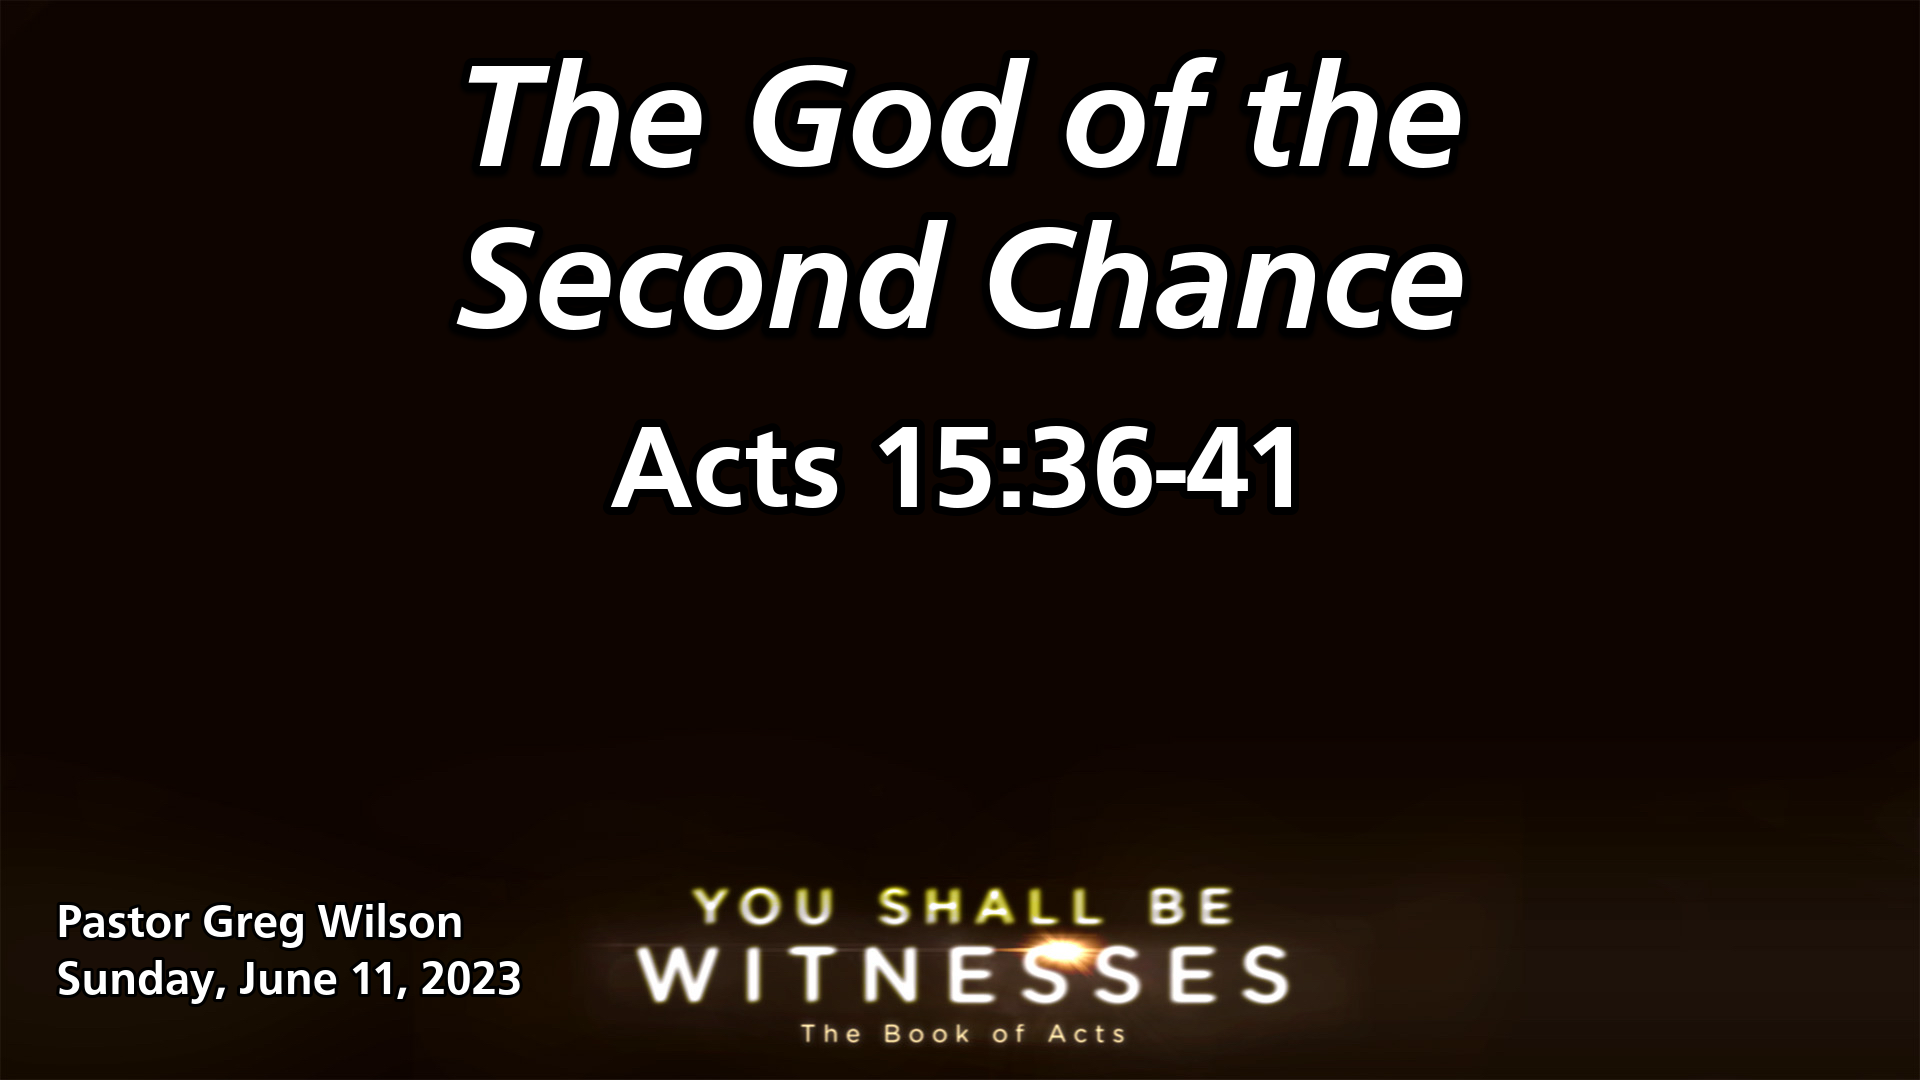 "The God of the Second Chance"